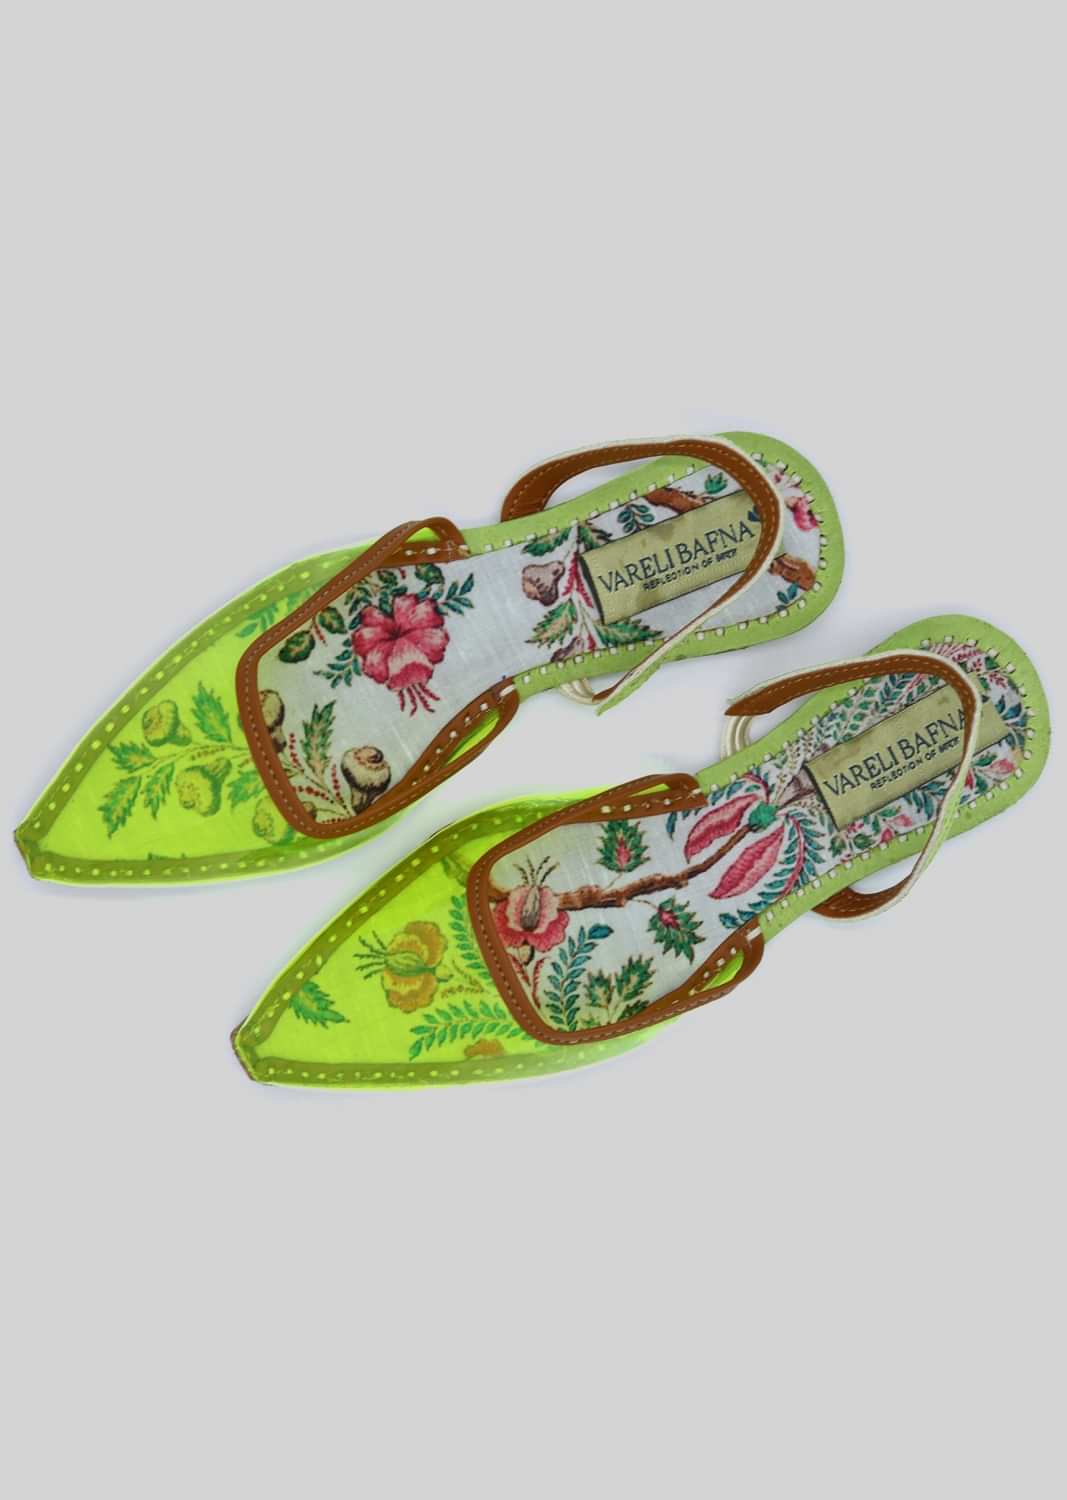 Lime Green Printed Flats In The Vinyl Leather Backstrap, Pointed Toe-Design